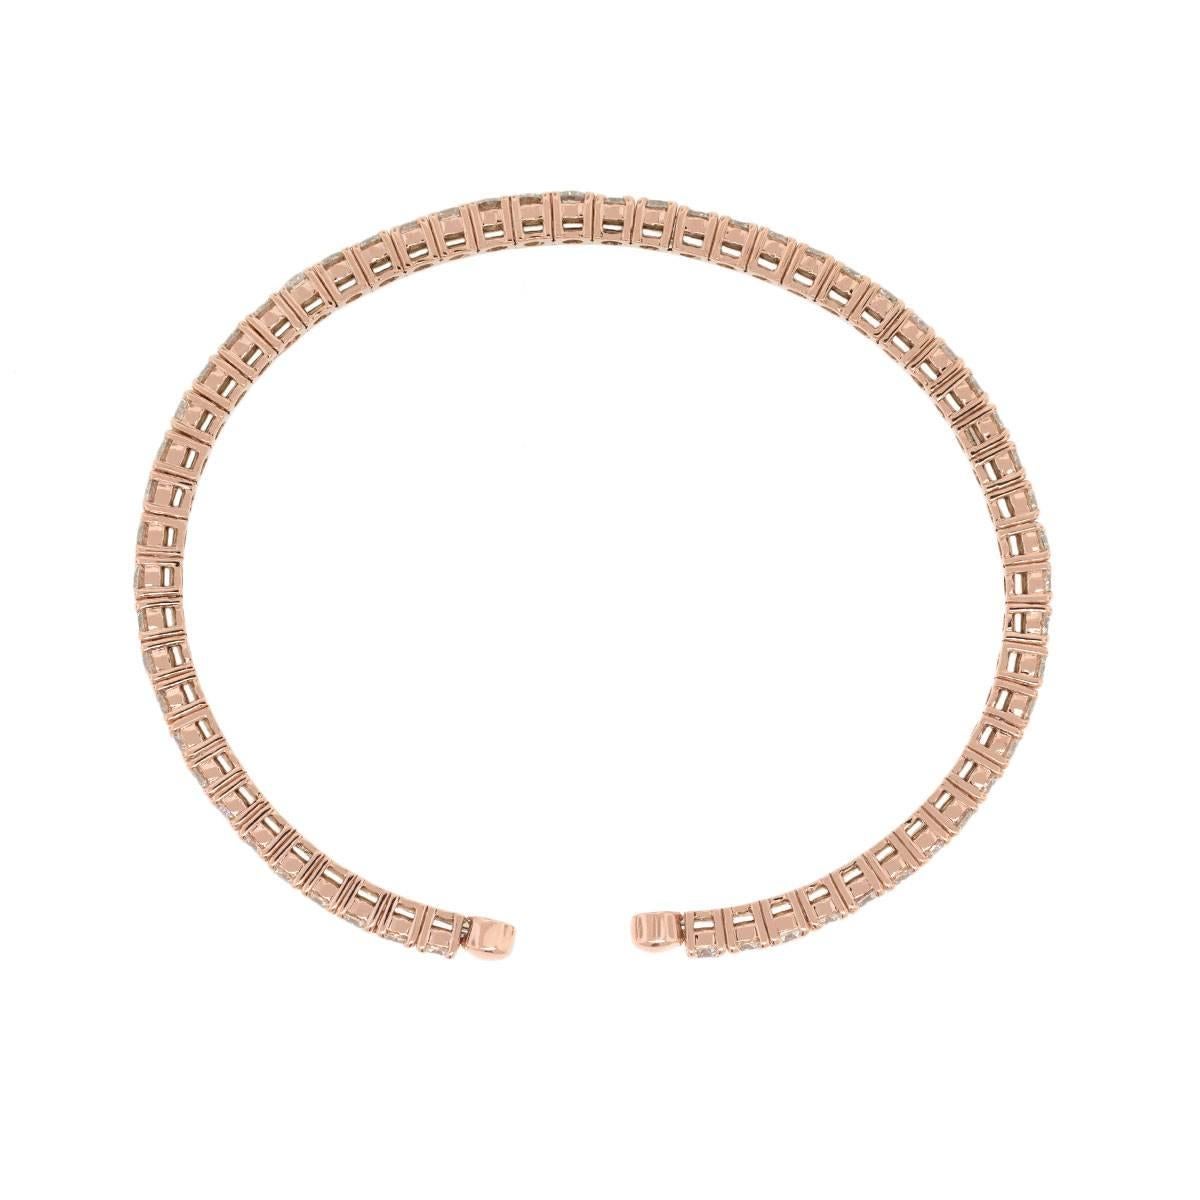 Material: 14k rose gold
Diamond Details: Approximately 5.22ctw of round brilliant diamonds. Diamonds are G/H in color and VS in clarity.
Total Weight: 14.0g (9.0dwt)
Measurements: Fits up to a 7